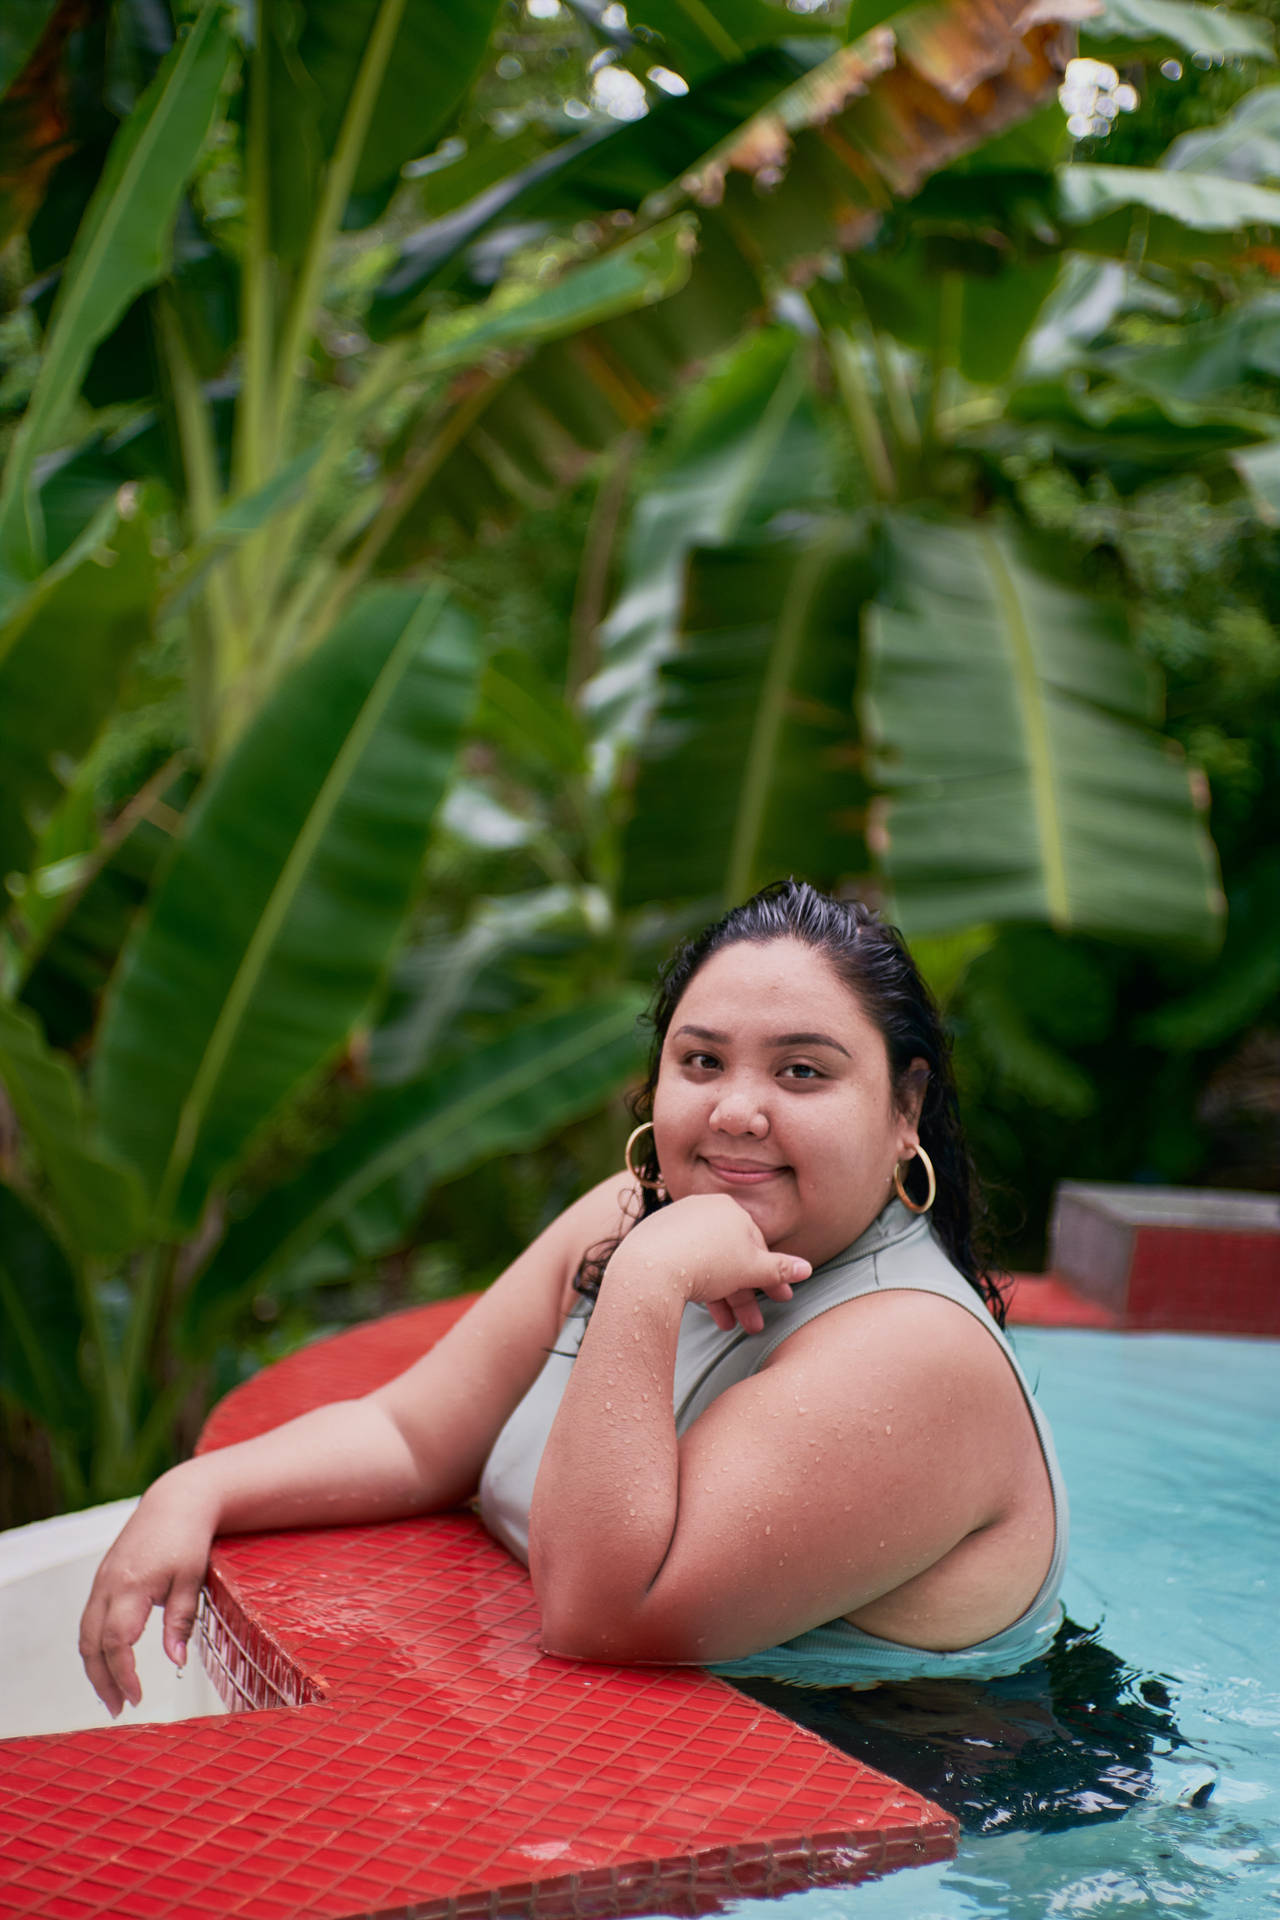 Empowering Confidence - Plus Size Woman Enjoying a Pool Day Wallpaper